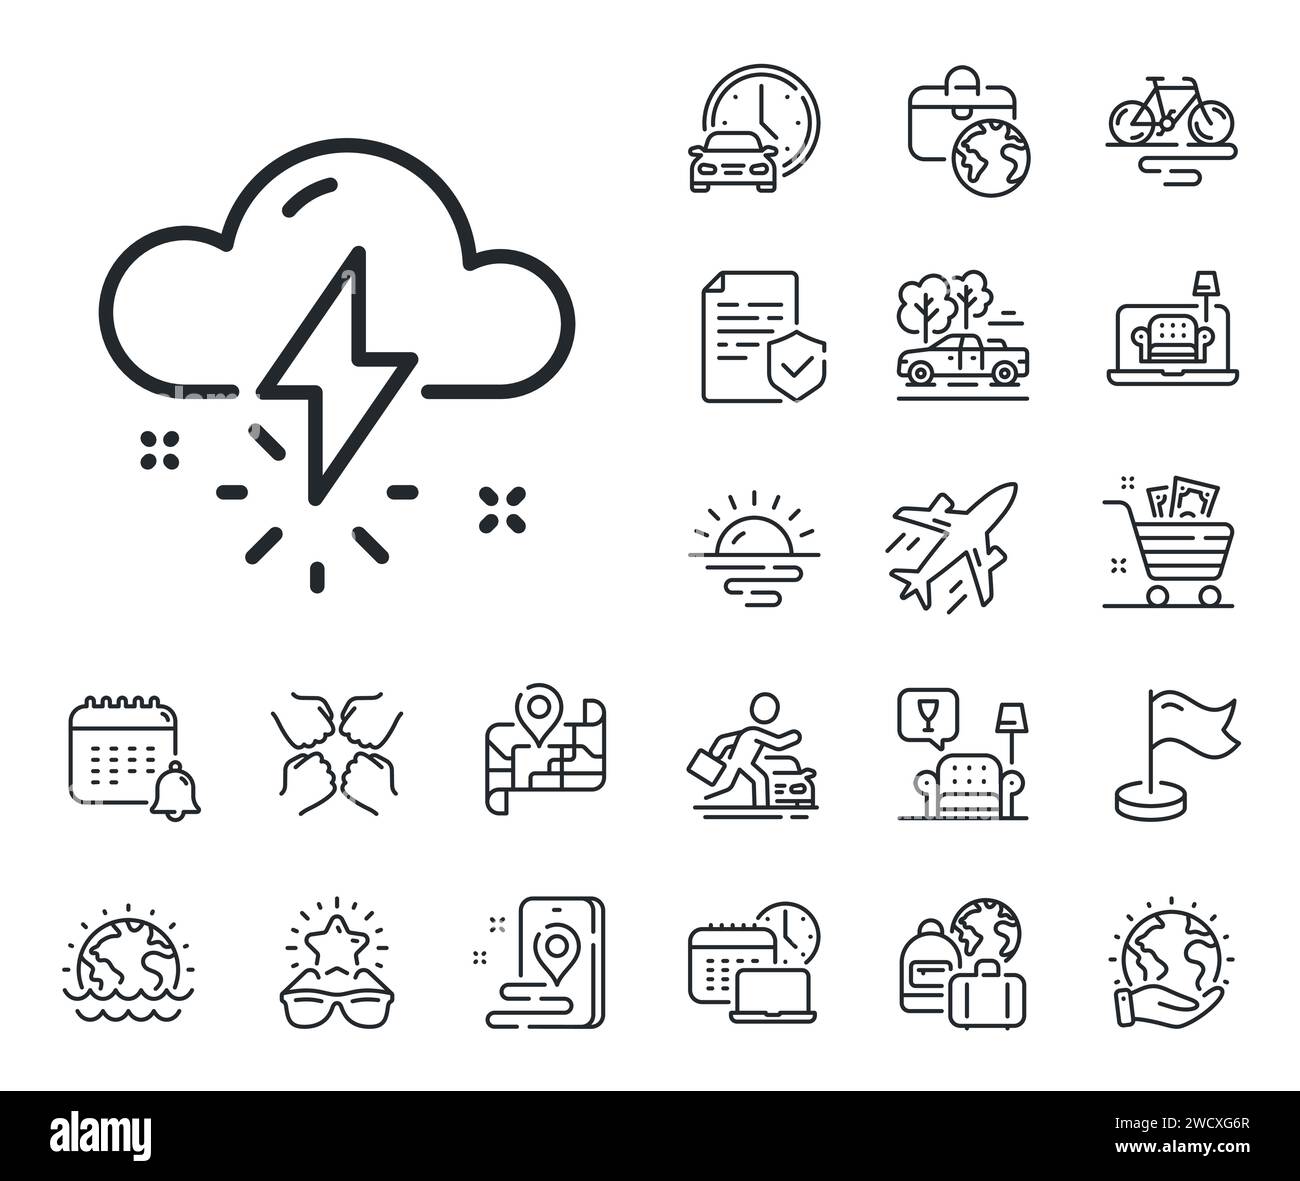 Thunderstorm weather line icon. Thunderbolt with cloud sign. Plane jet, travel map and baggage claim. Vector Stock Vector